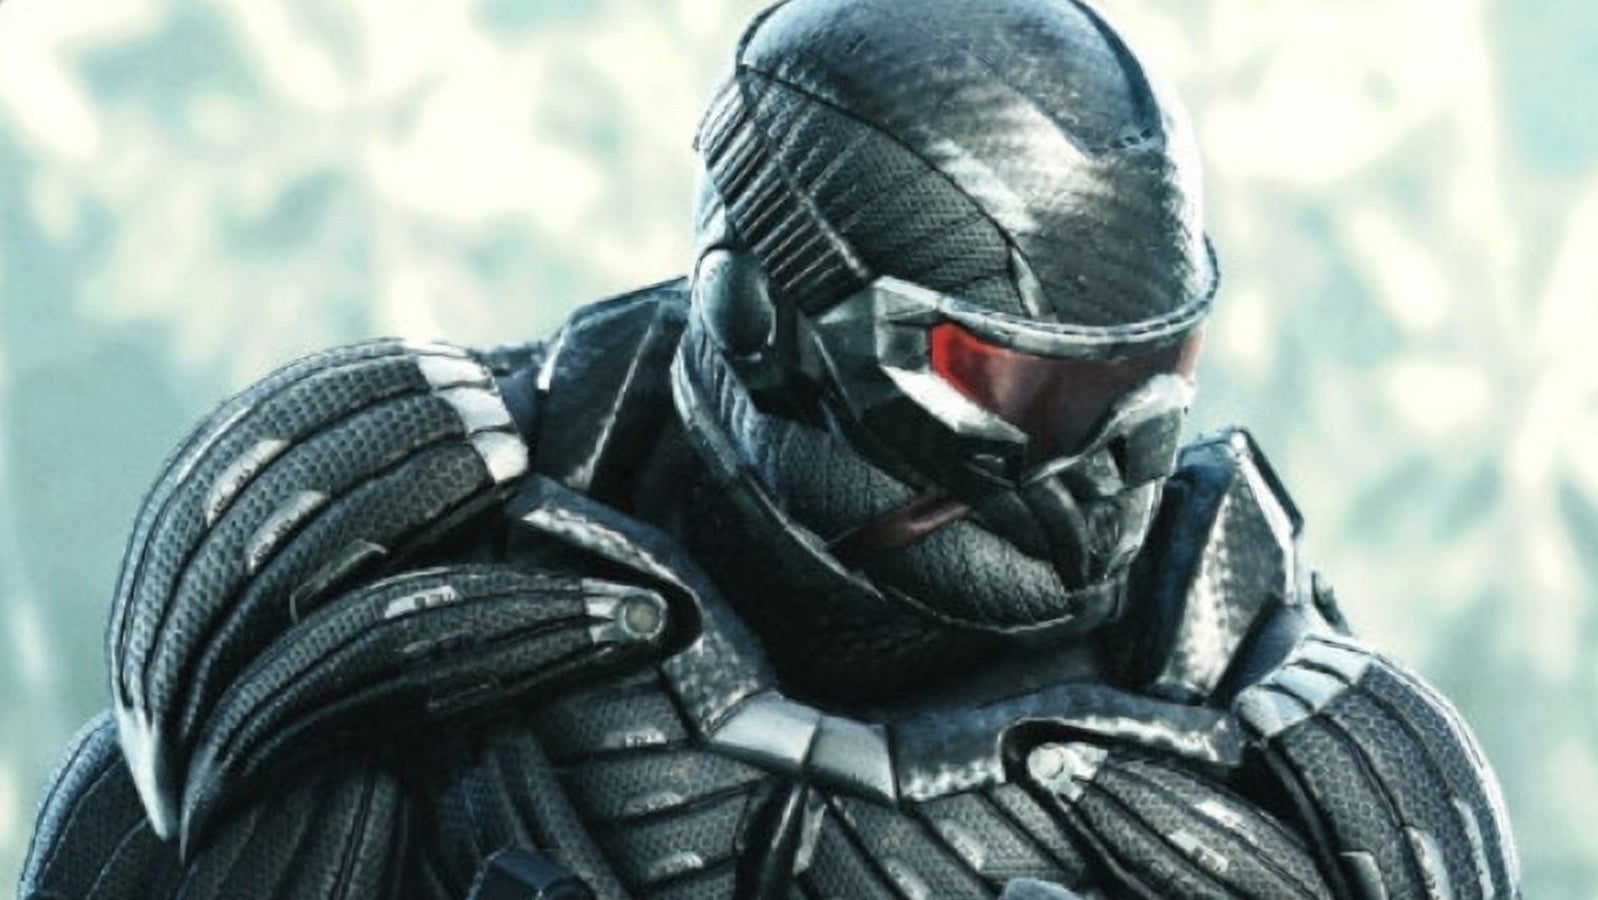 Image for Crysis Remastered PC tech review: brutal performance limits can't be overlooked